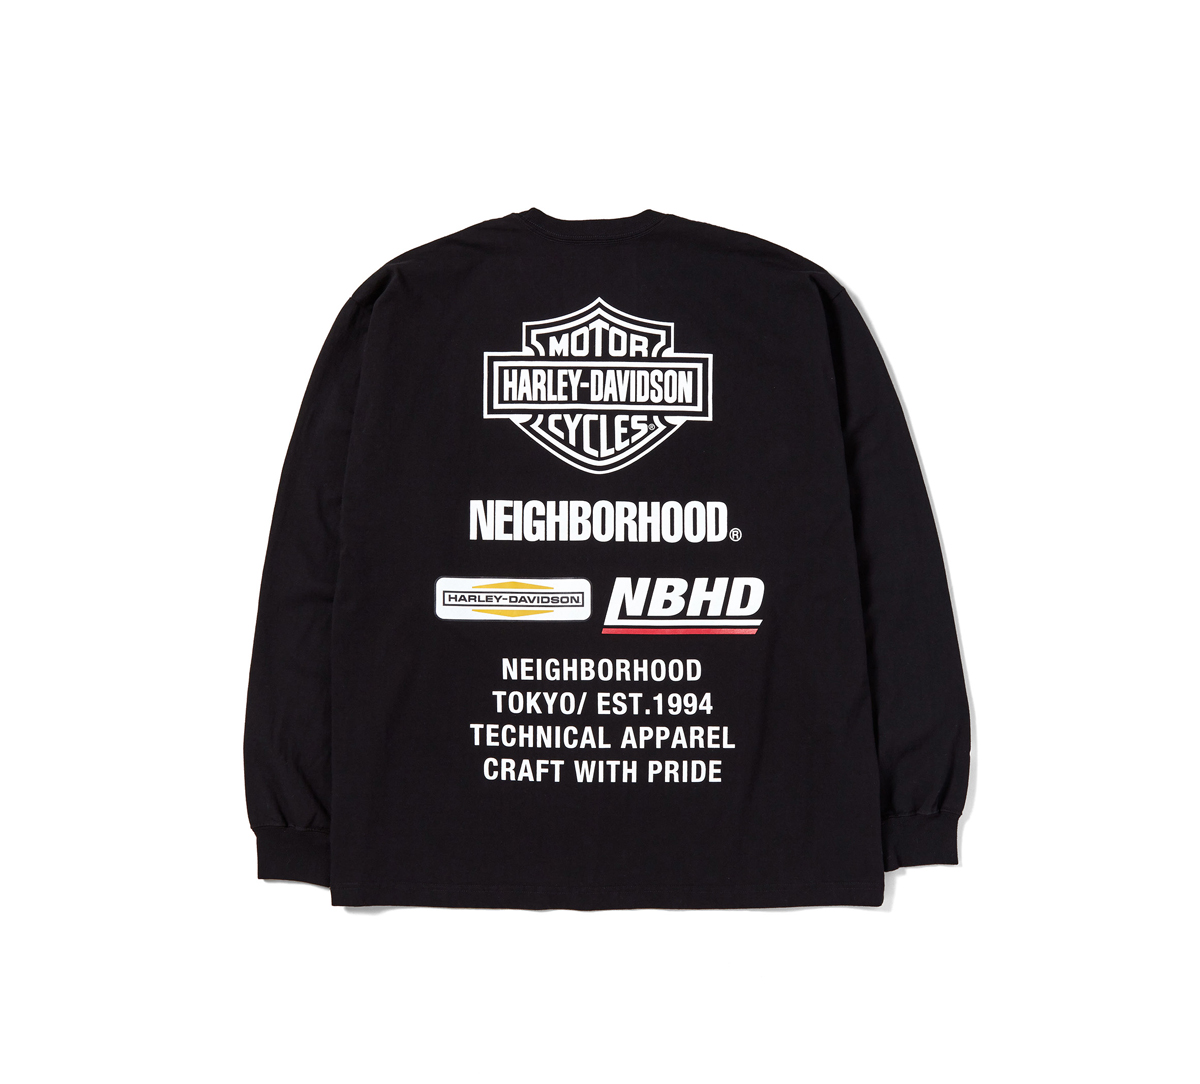 NEIGHBORHOOD & Harley-Davidson's Collab Rides Out Soon